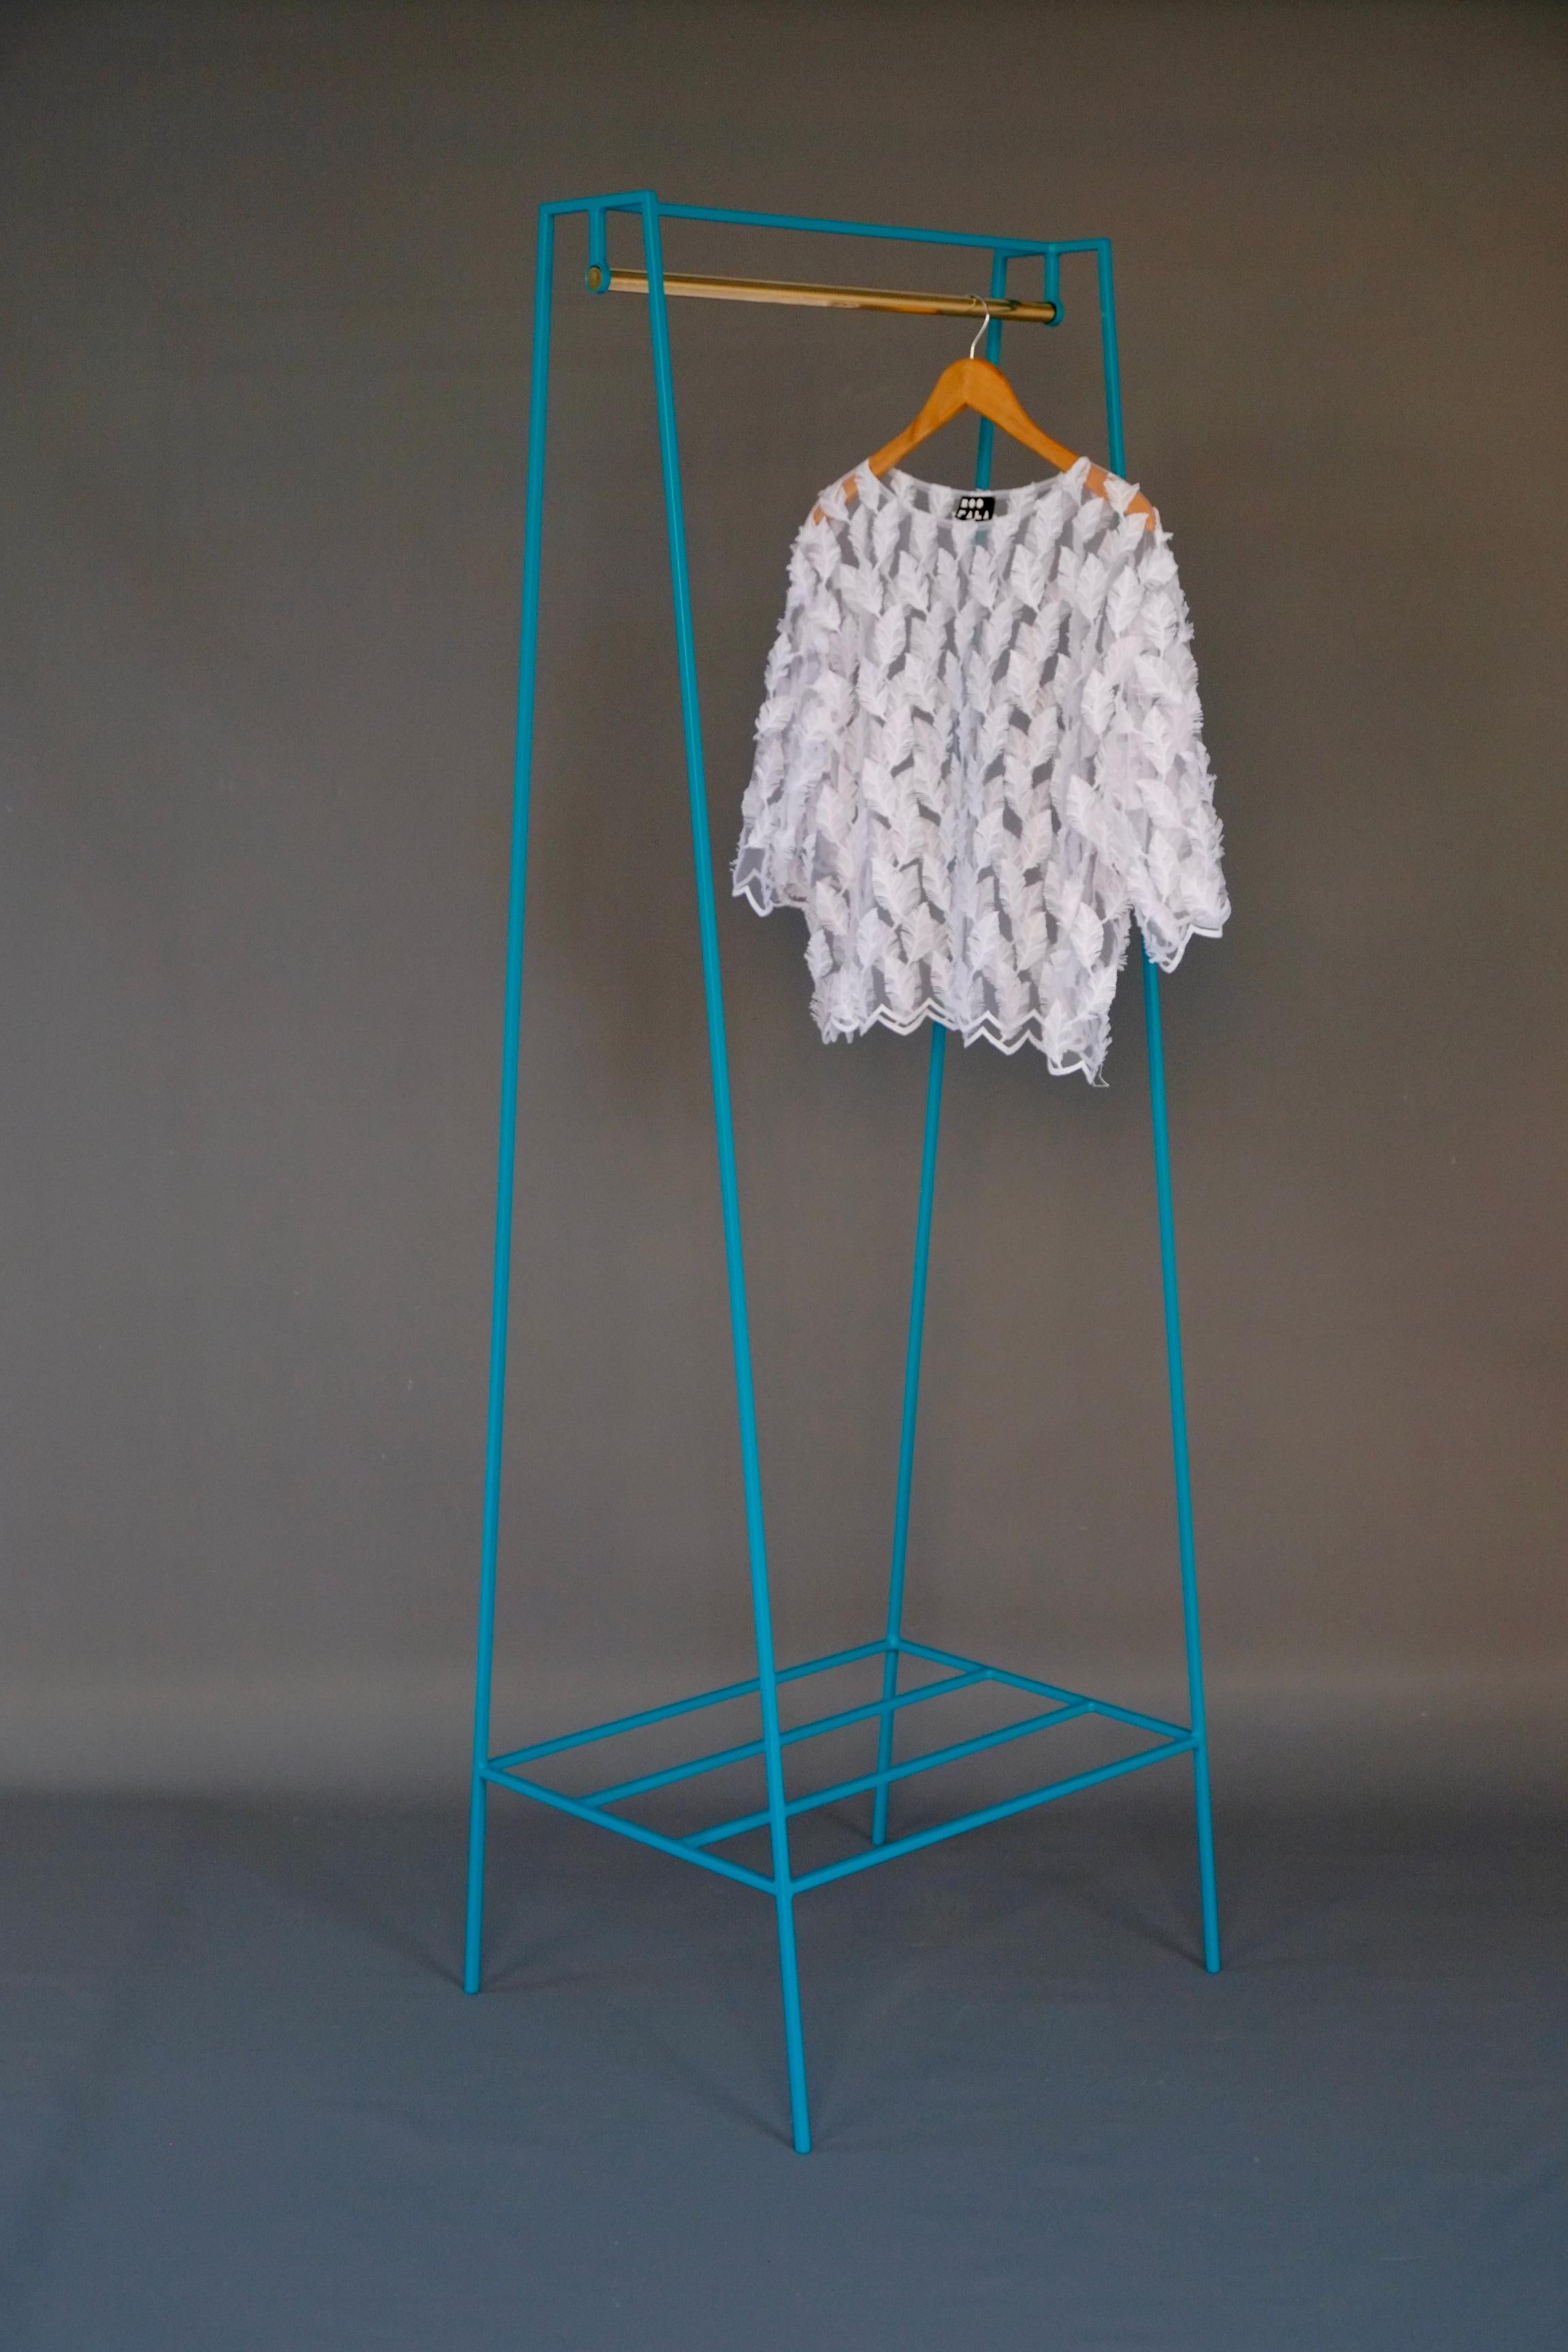 The steel slimline 'A' clothes rail is one of &New's signature pieces. A stunning addition to any bedroom or hallway, the minimal design looks delicate but is surprisingly robust. This one is powder coated in turquoise, but the clothes rail is